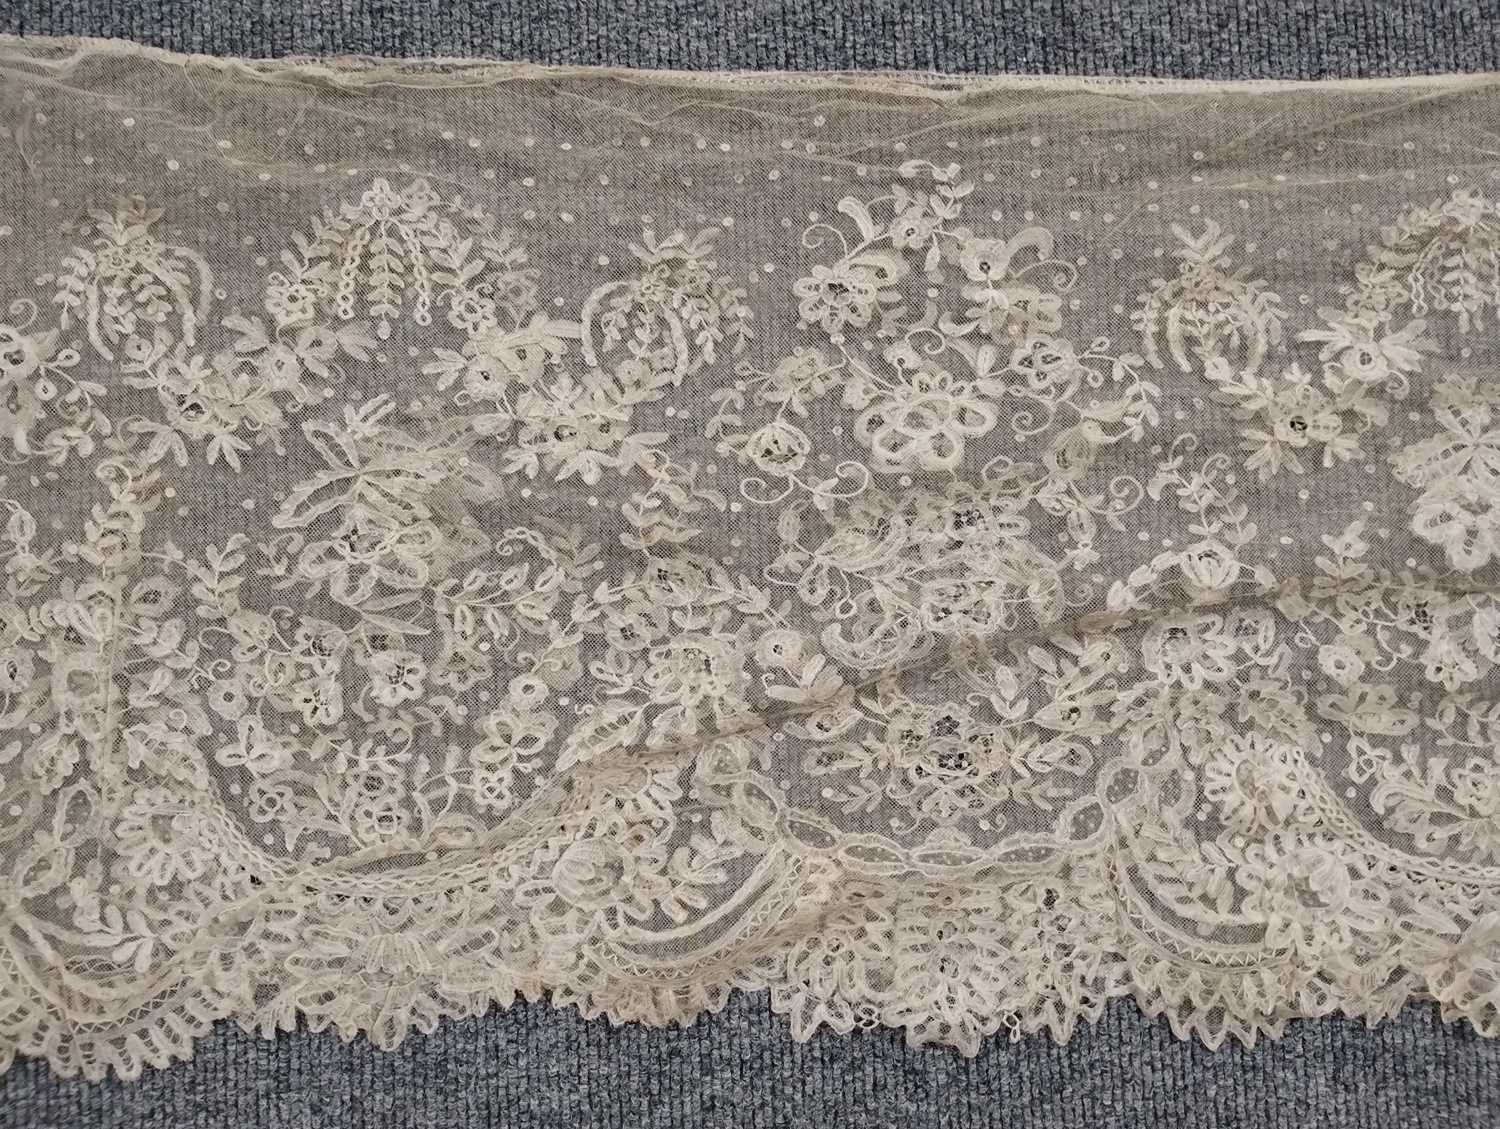 Early 20th Century Lace comprising a flounce with appliquéd flower heads and motifs within a - Image 3 of 32